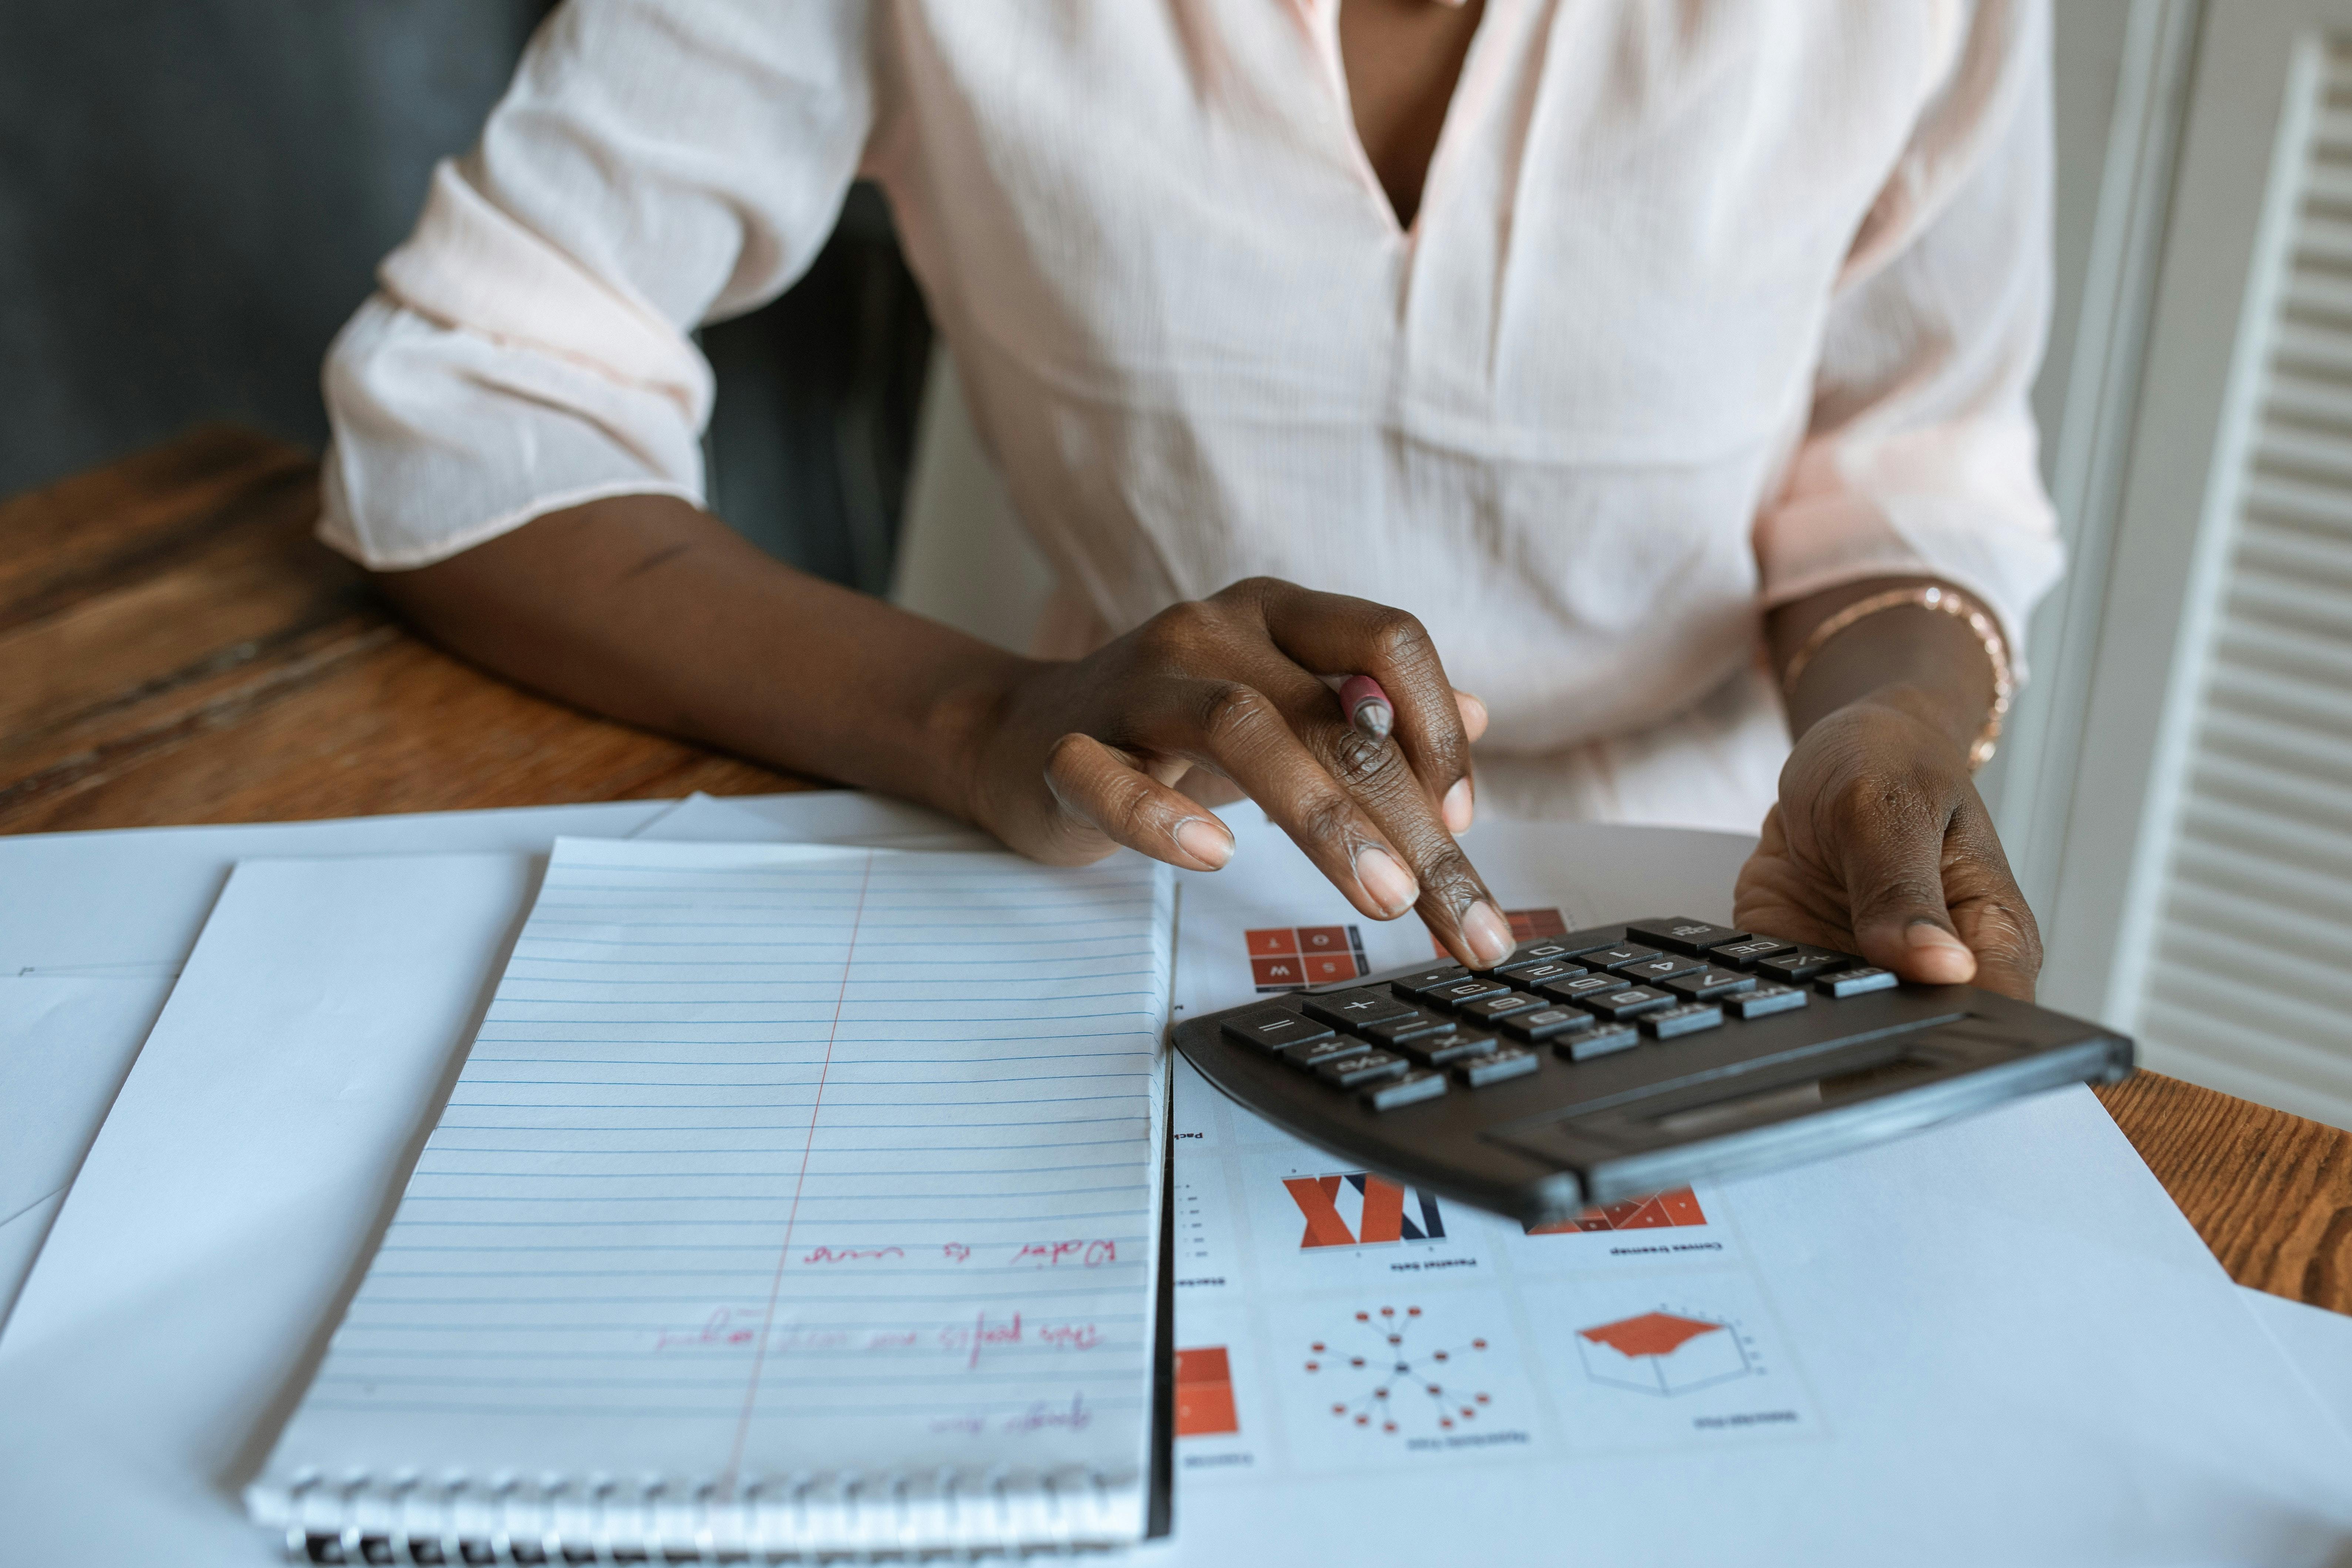 Woman at desk using calculator with notepad